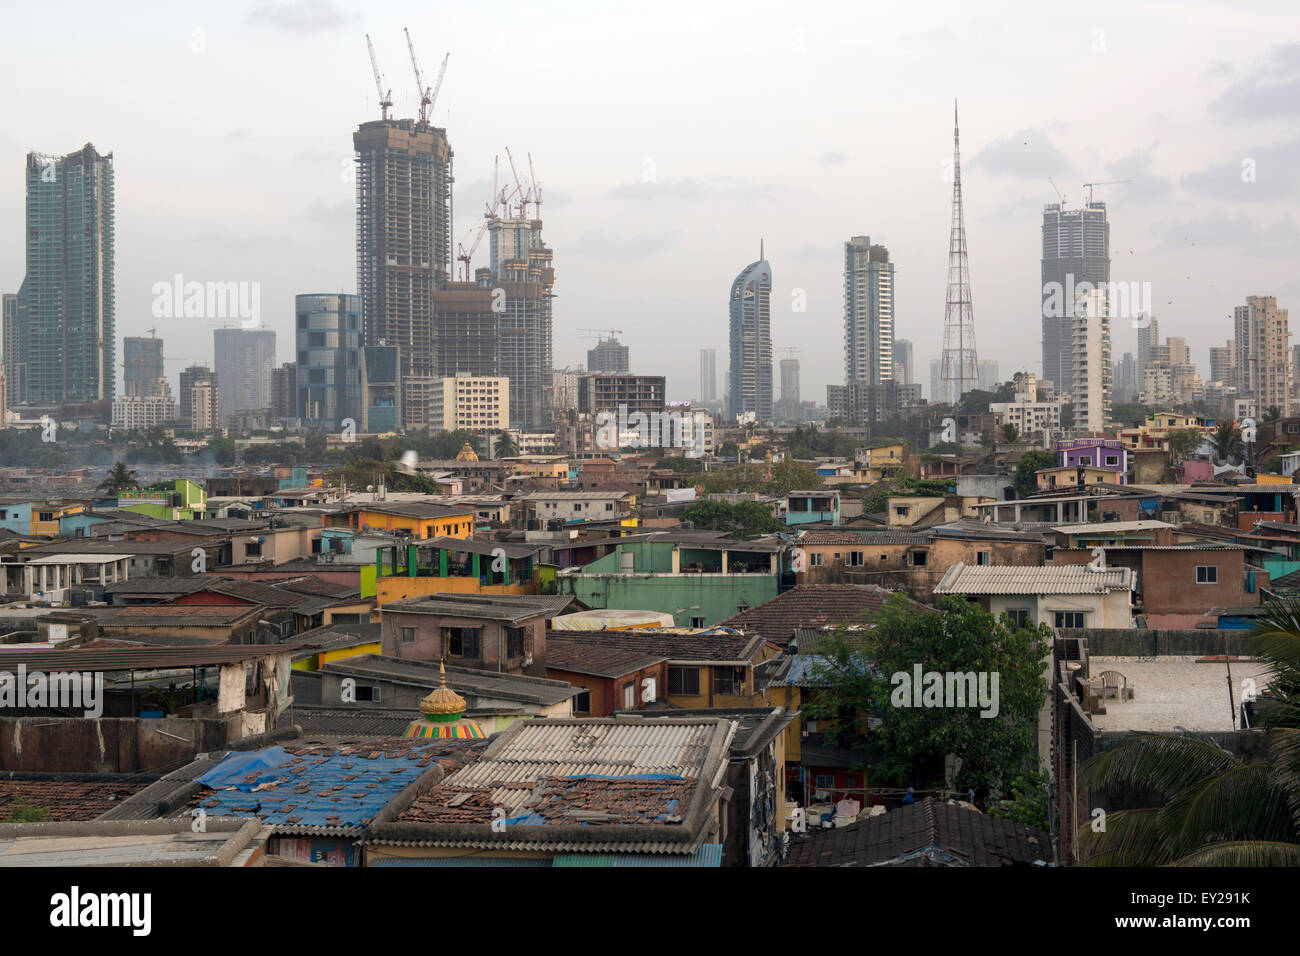 Mumbai Skyline with Slum houses & skyscrapers highrise buildings in the background Stock Photo